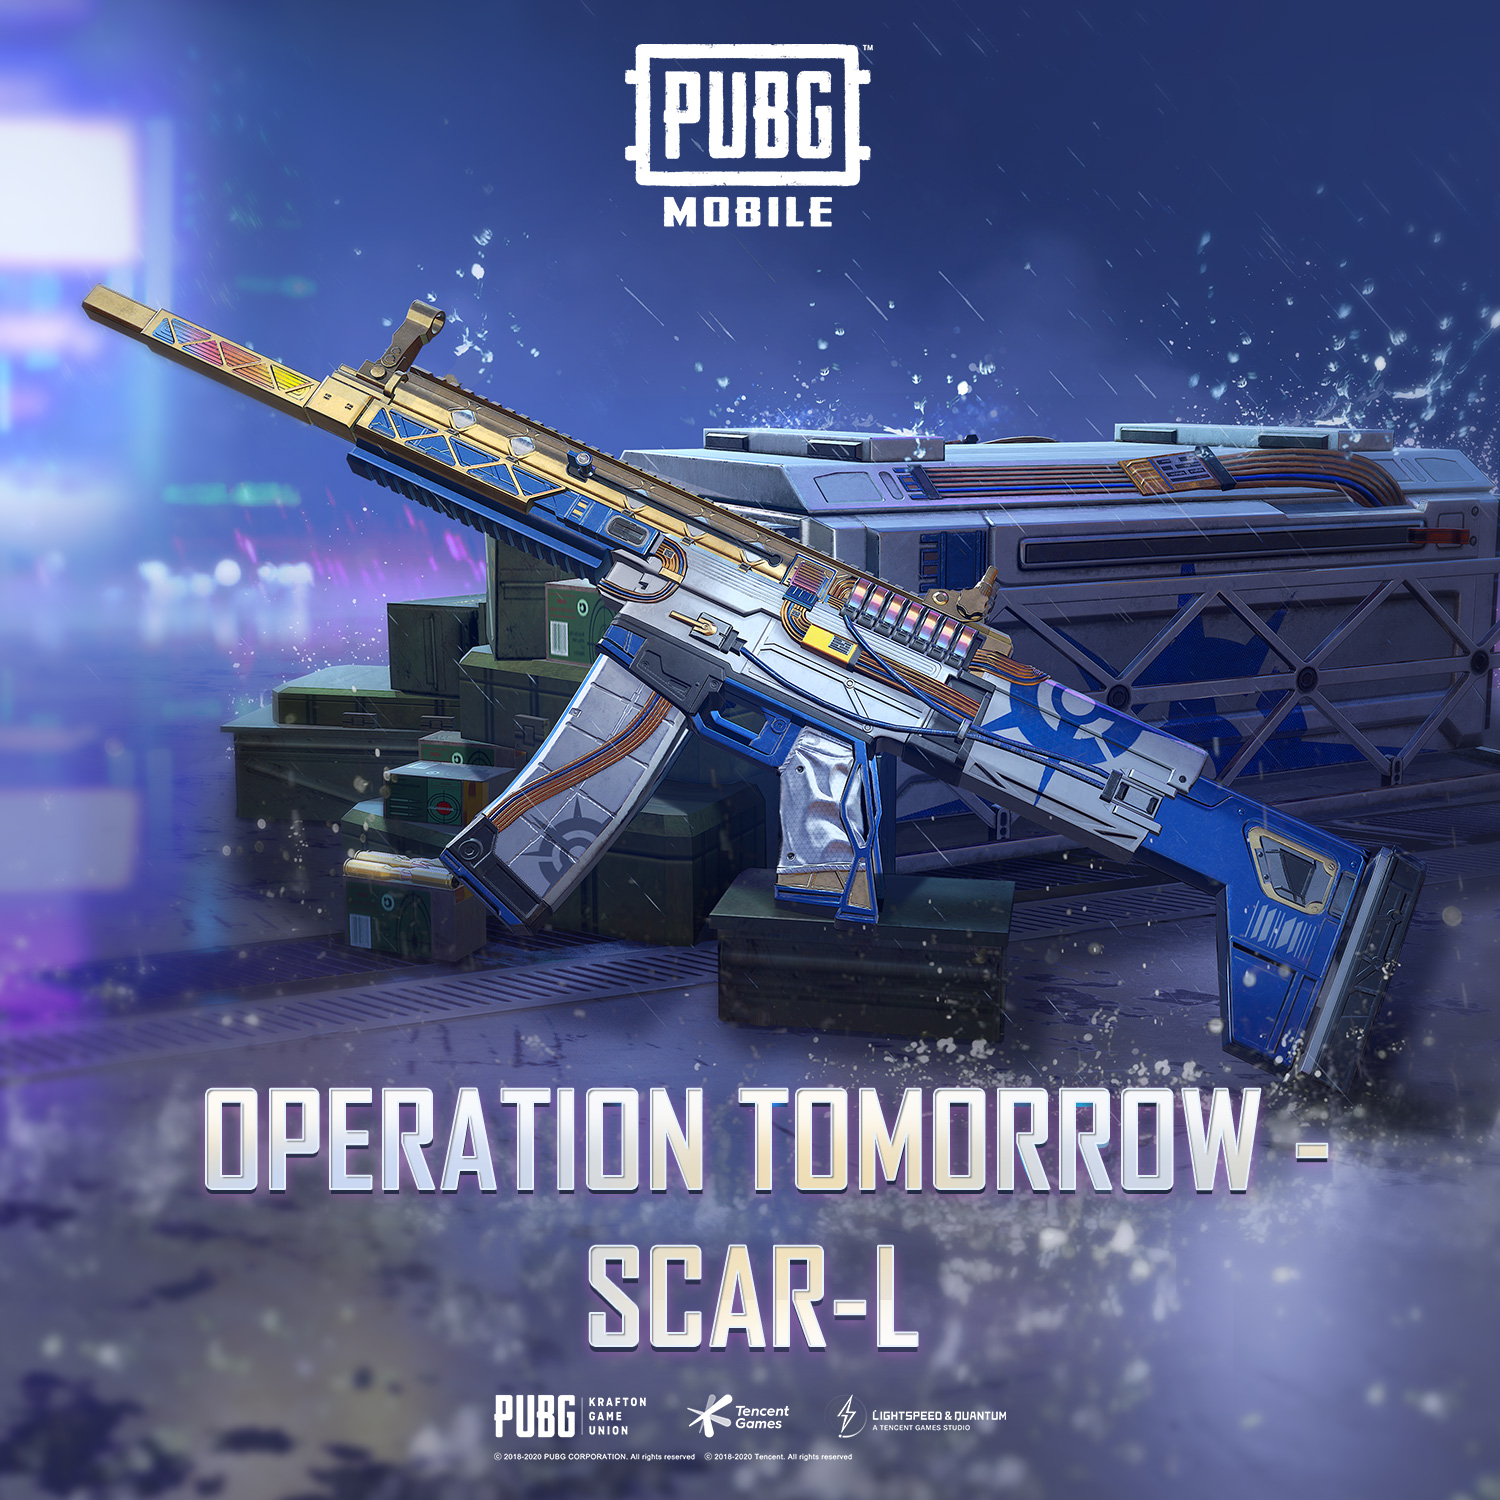 Pubg Mobile Tomorrow S Never Guaranteed Pick Up The New Operation Tomorrow Scar L Via Lucky Spin Pubgm Pubgmobile